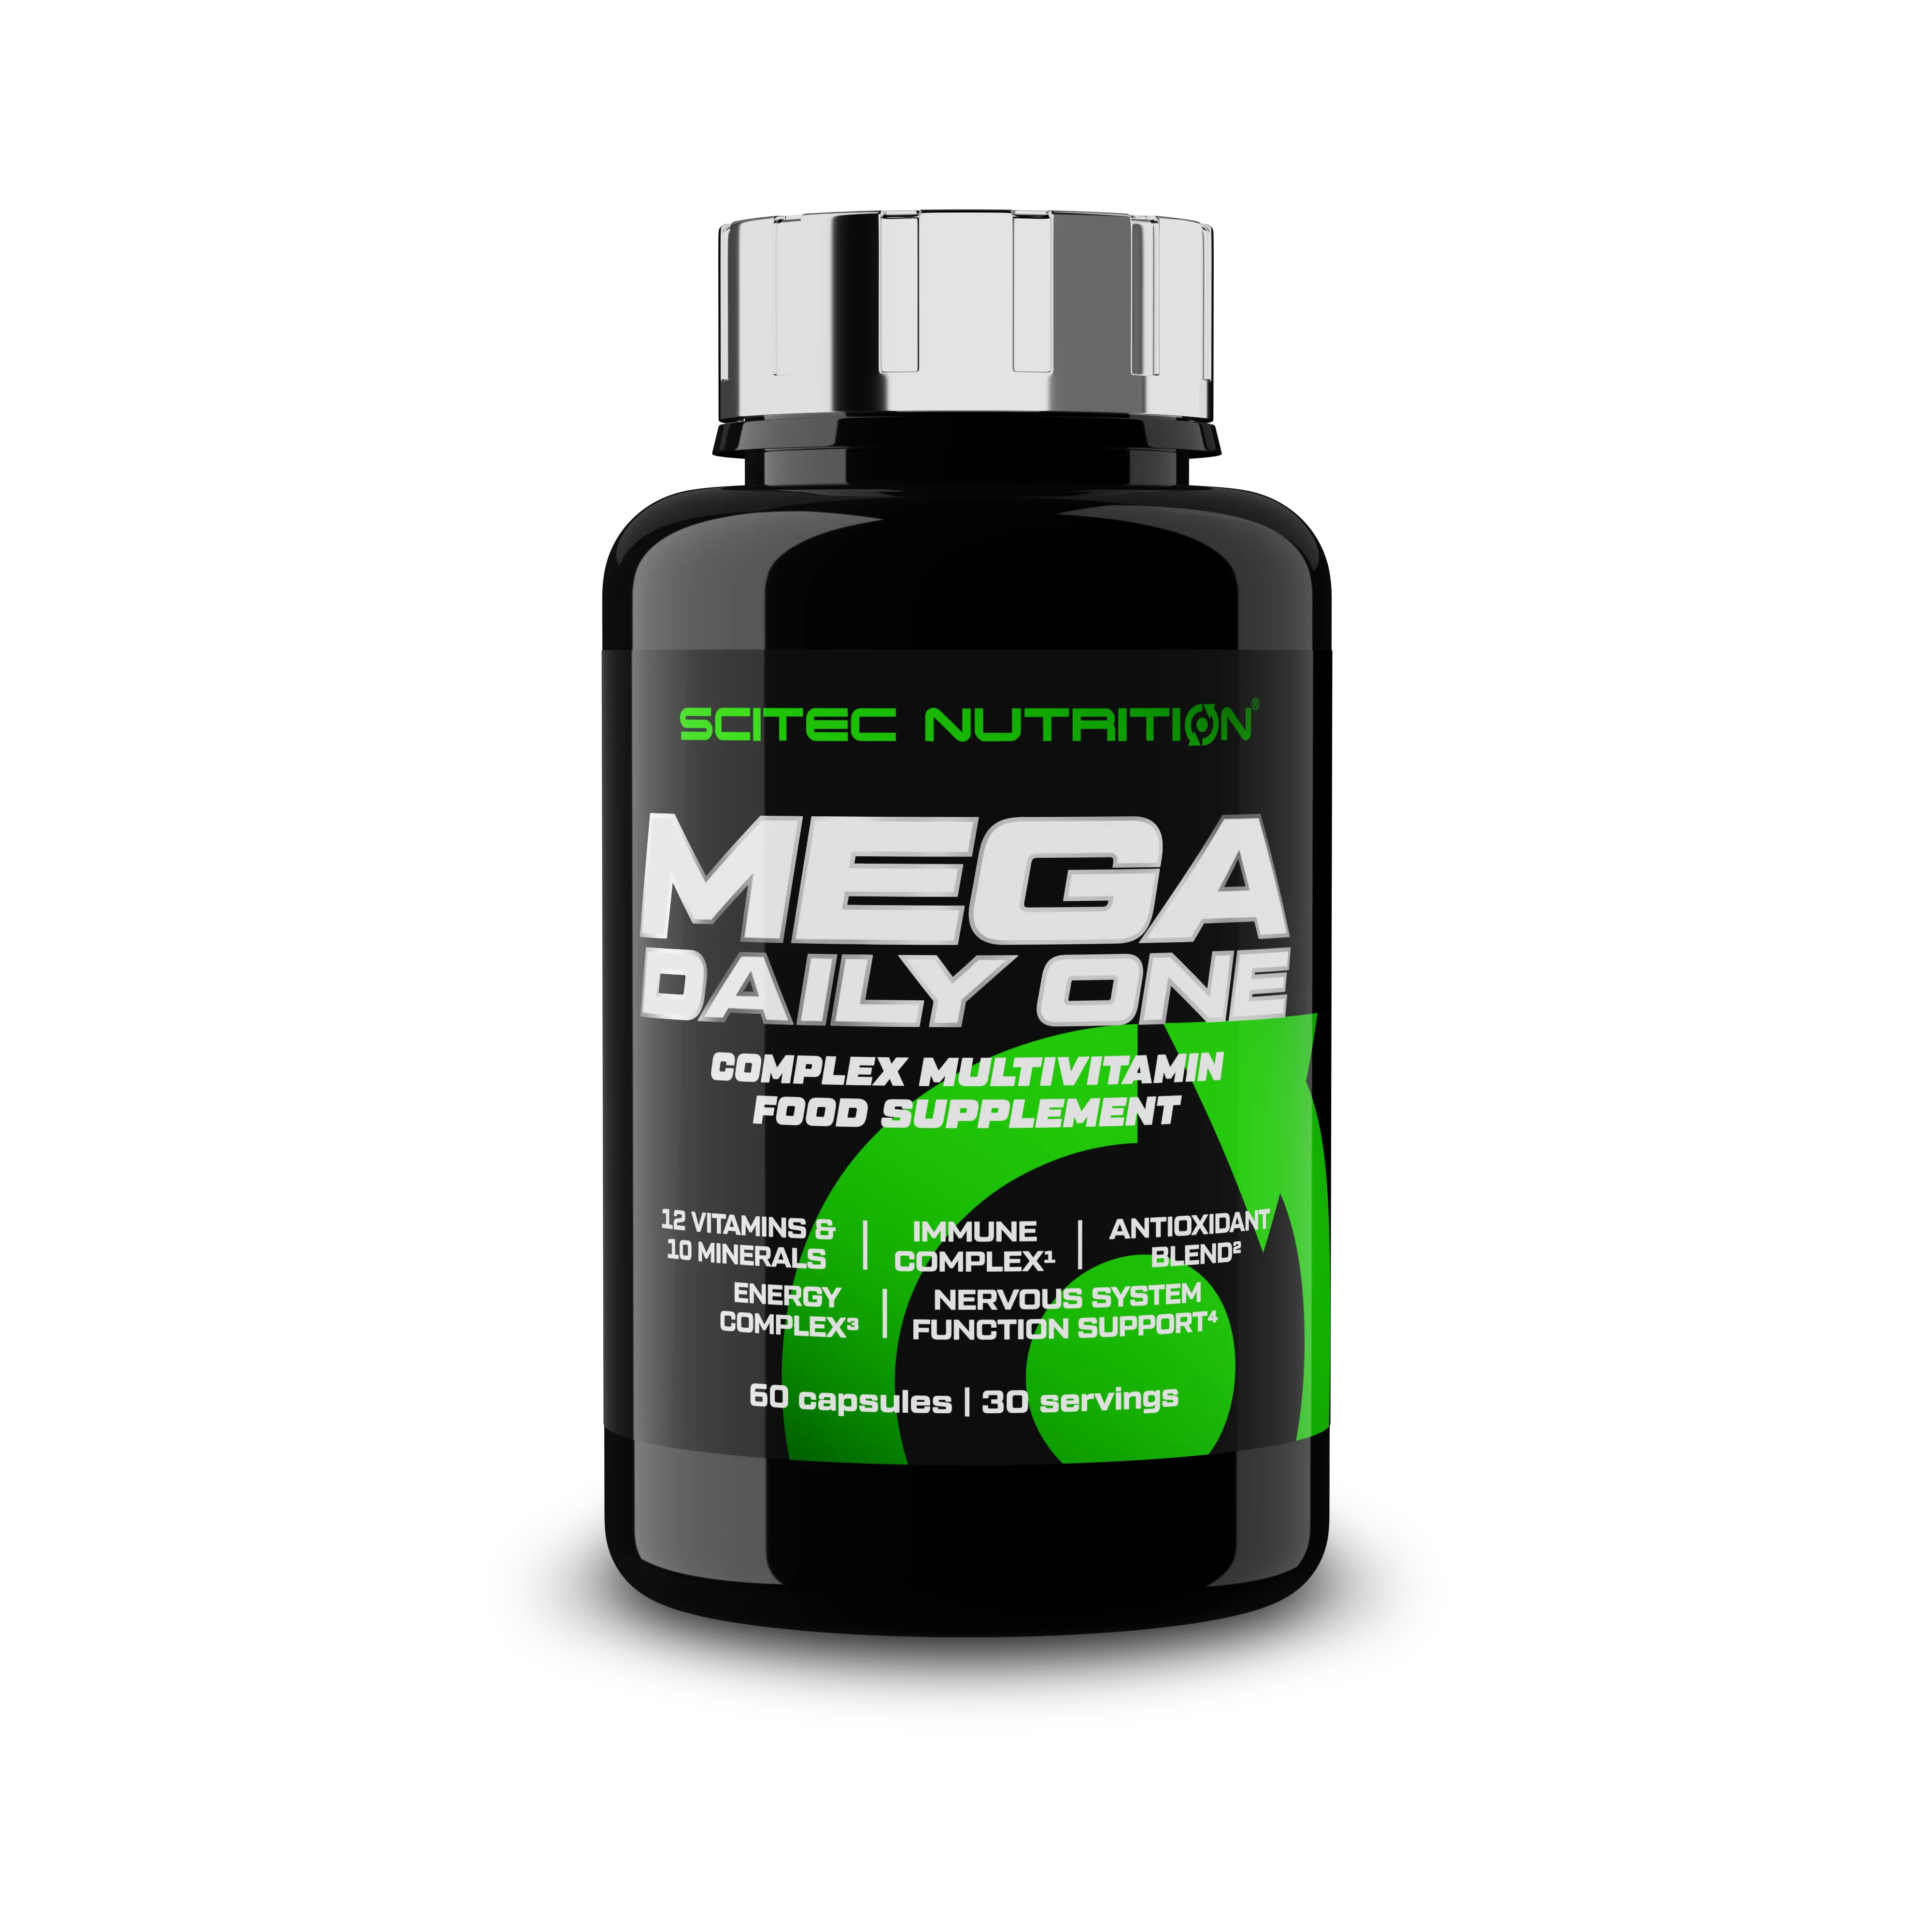 Scitec Nutrition Mega Daily One